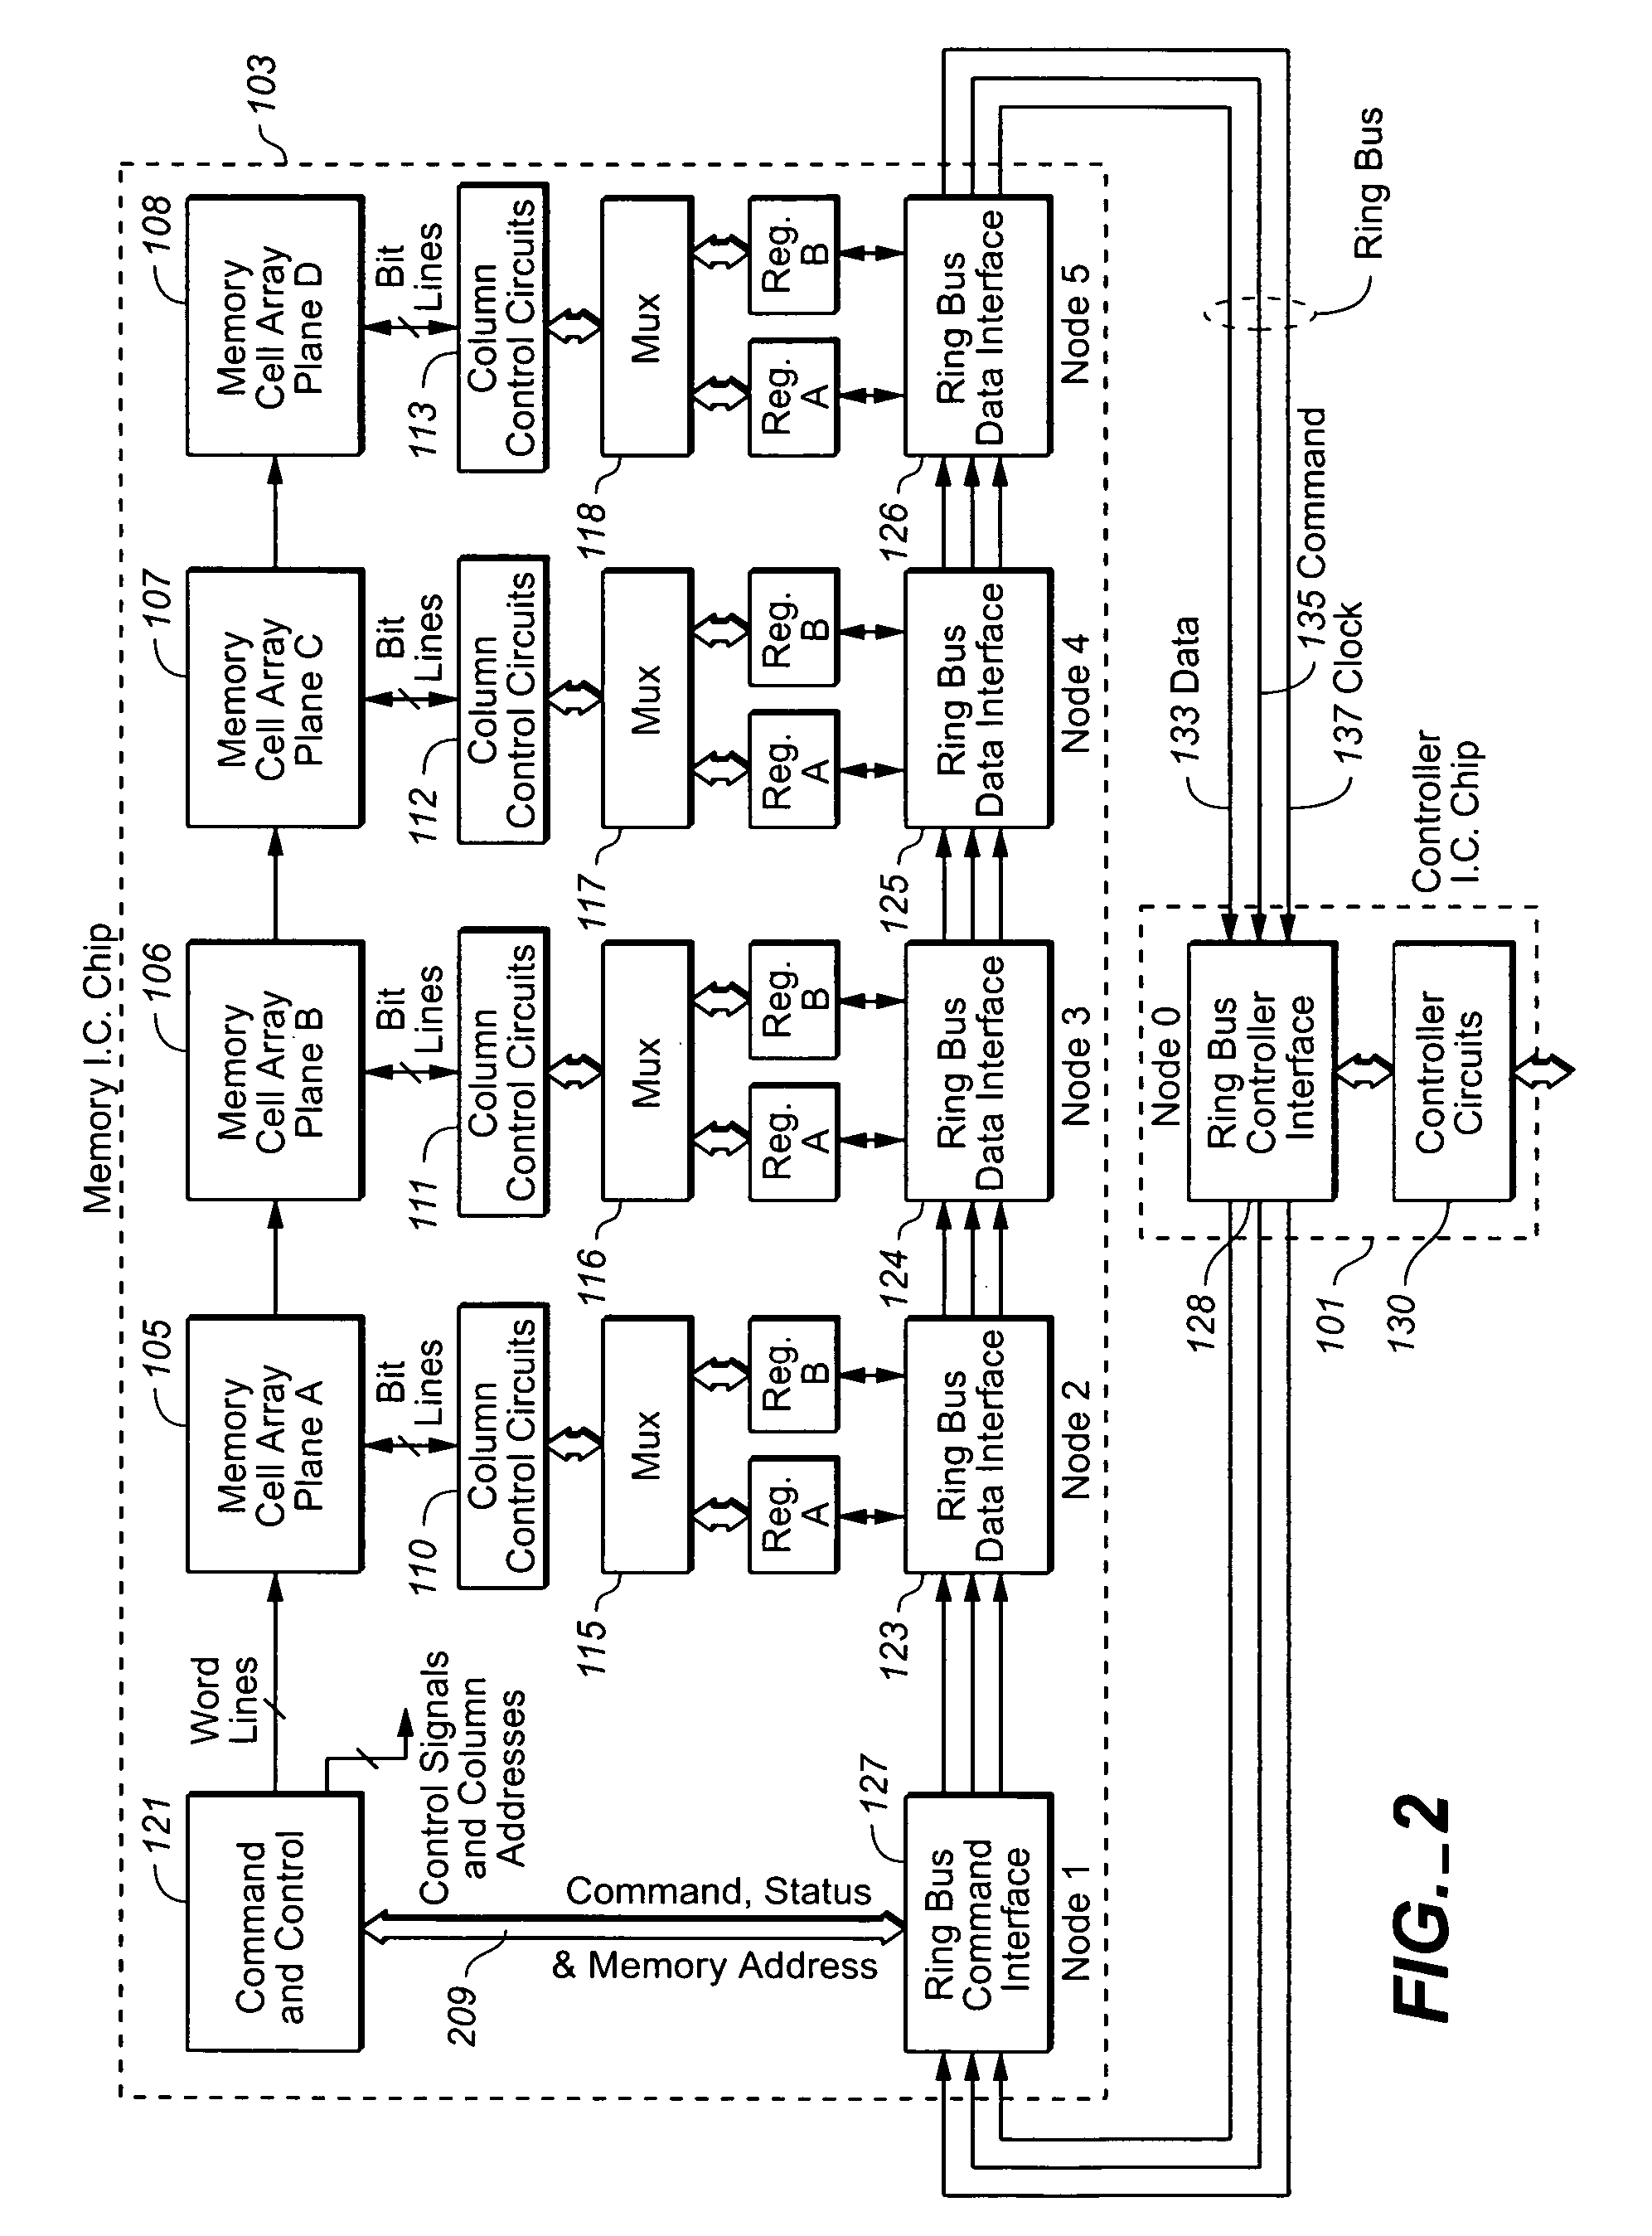 Ring bus structure and its use in flash memory systems